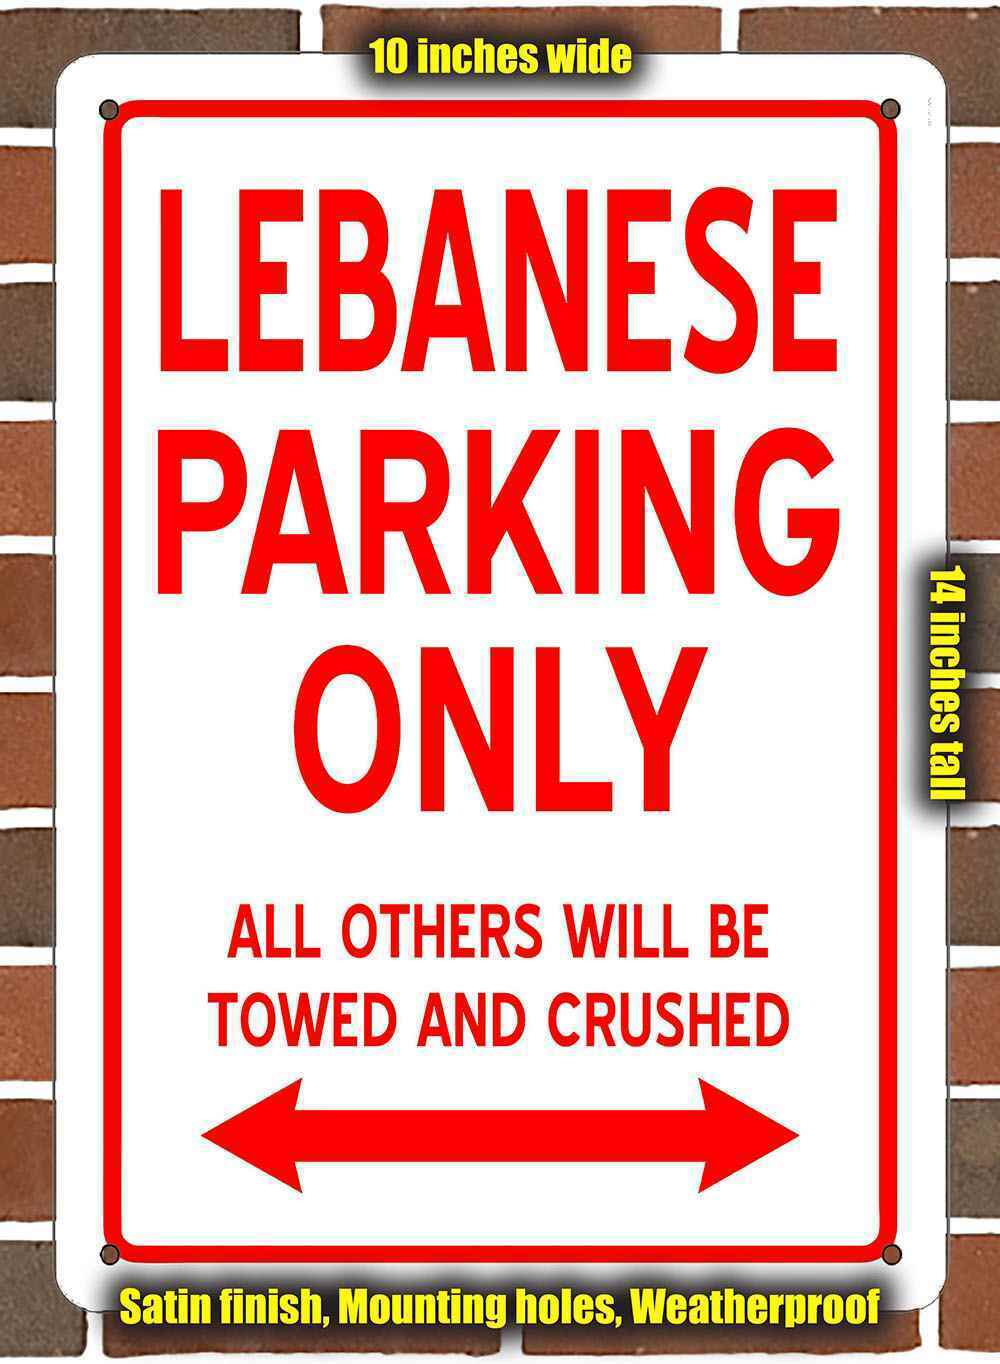 Metal Sign - LEBANESE PARKING ONLY- 10x14 inches